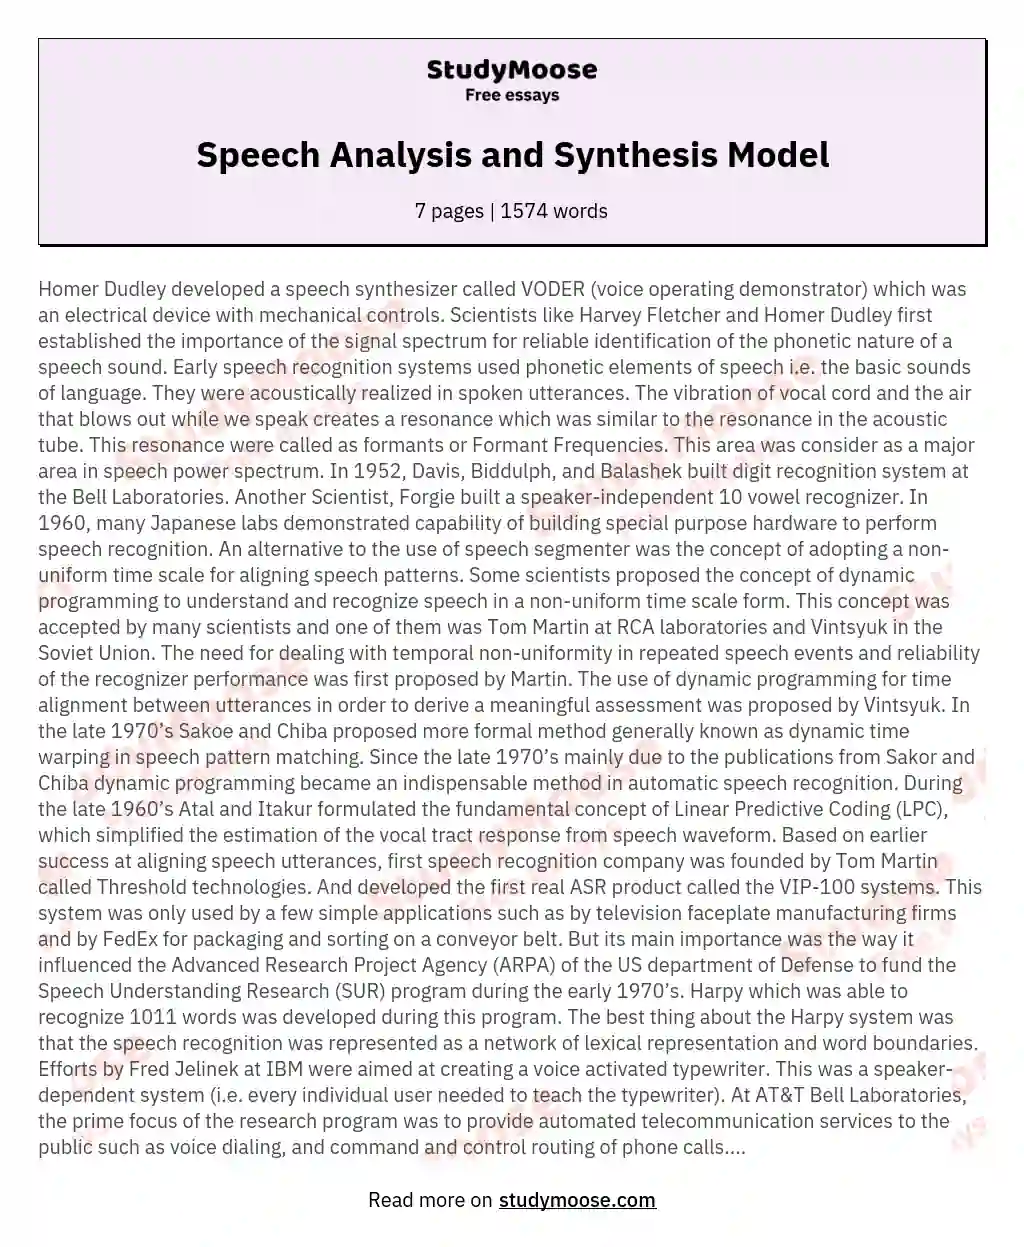 Speech Analysis and Synthesis Model essay